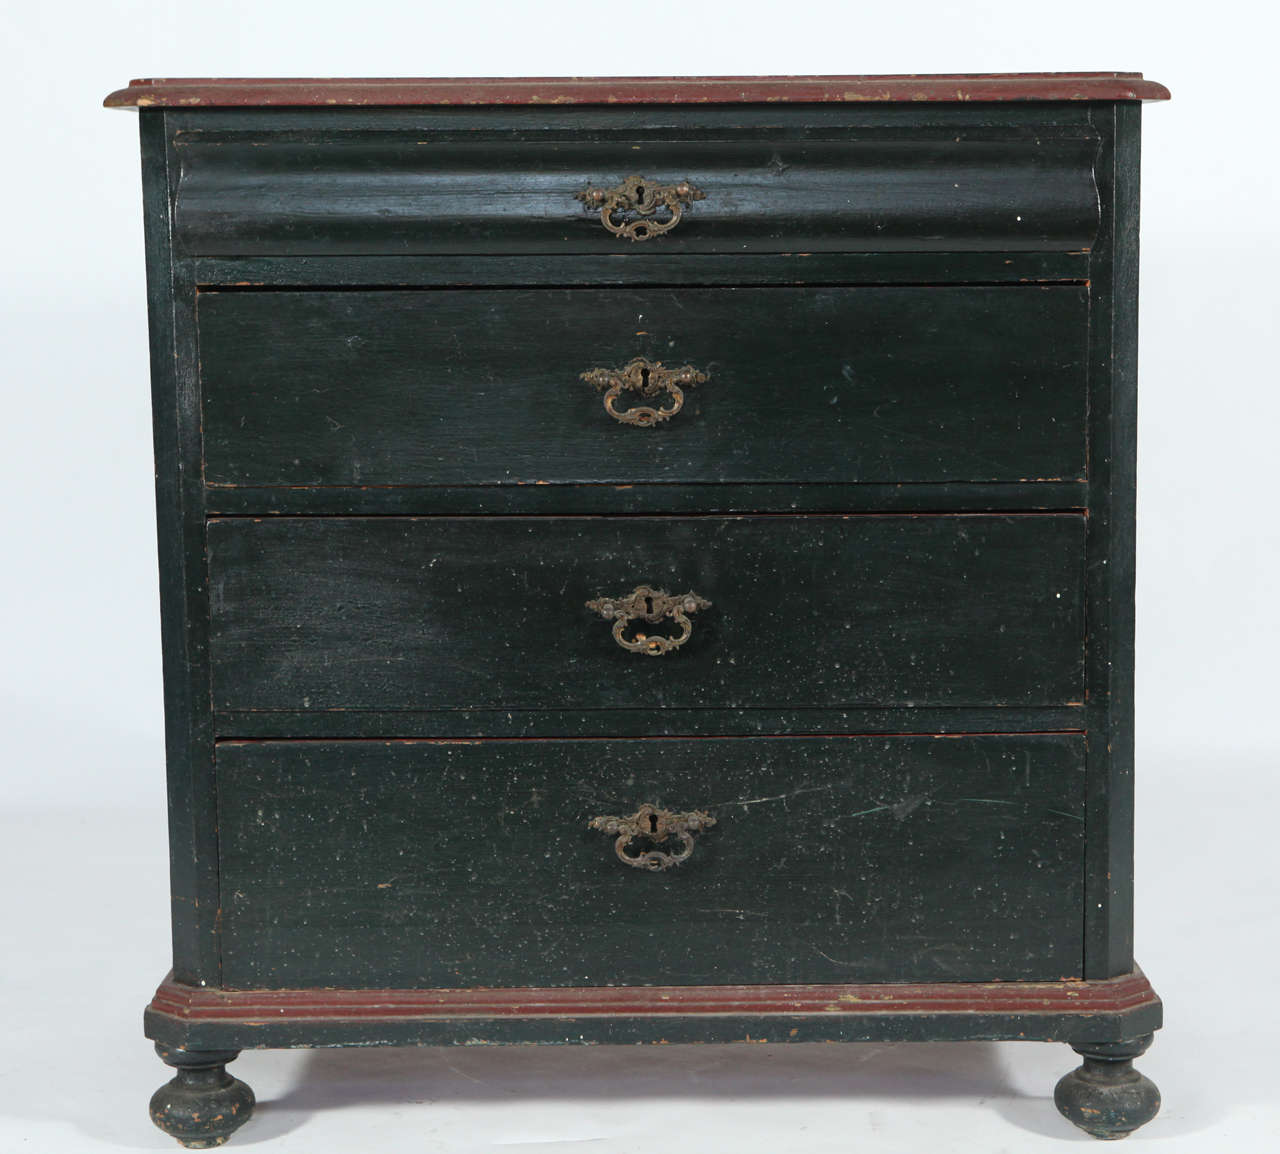 Charming 19th Century chest of drawers. Painted pine with original brass hardware. Denmark, late 1800s. 